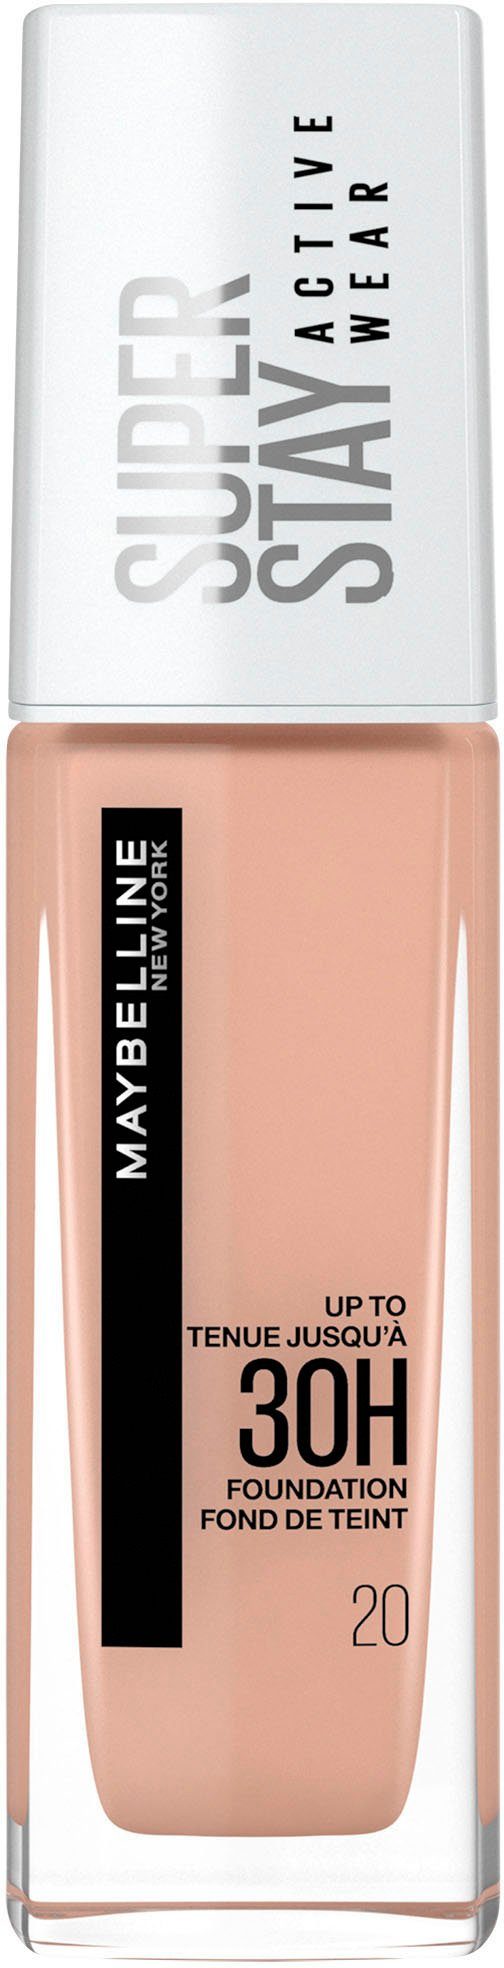 Active MAYBELLINE Foundation 20 Wear NEW Super Cameo Stay YORK